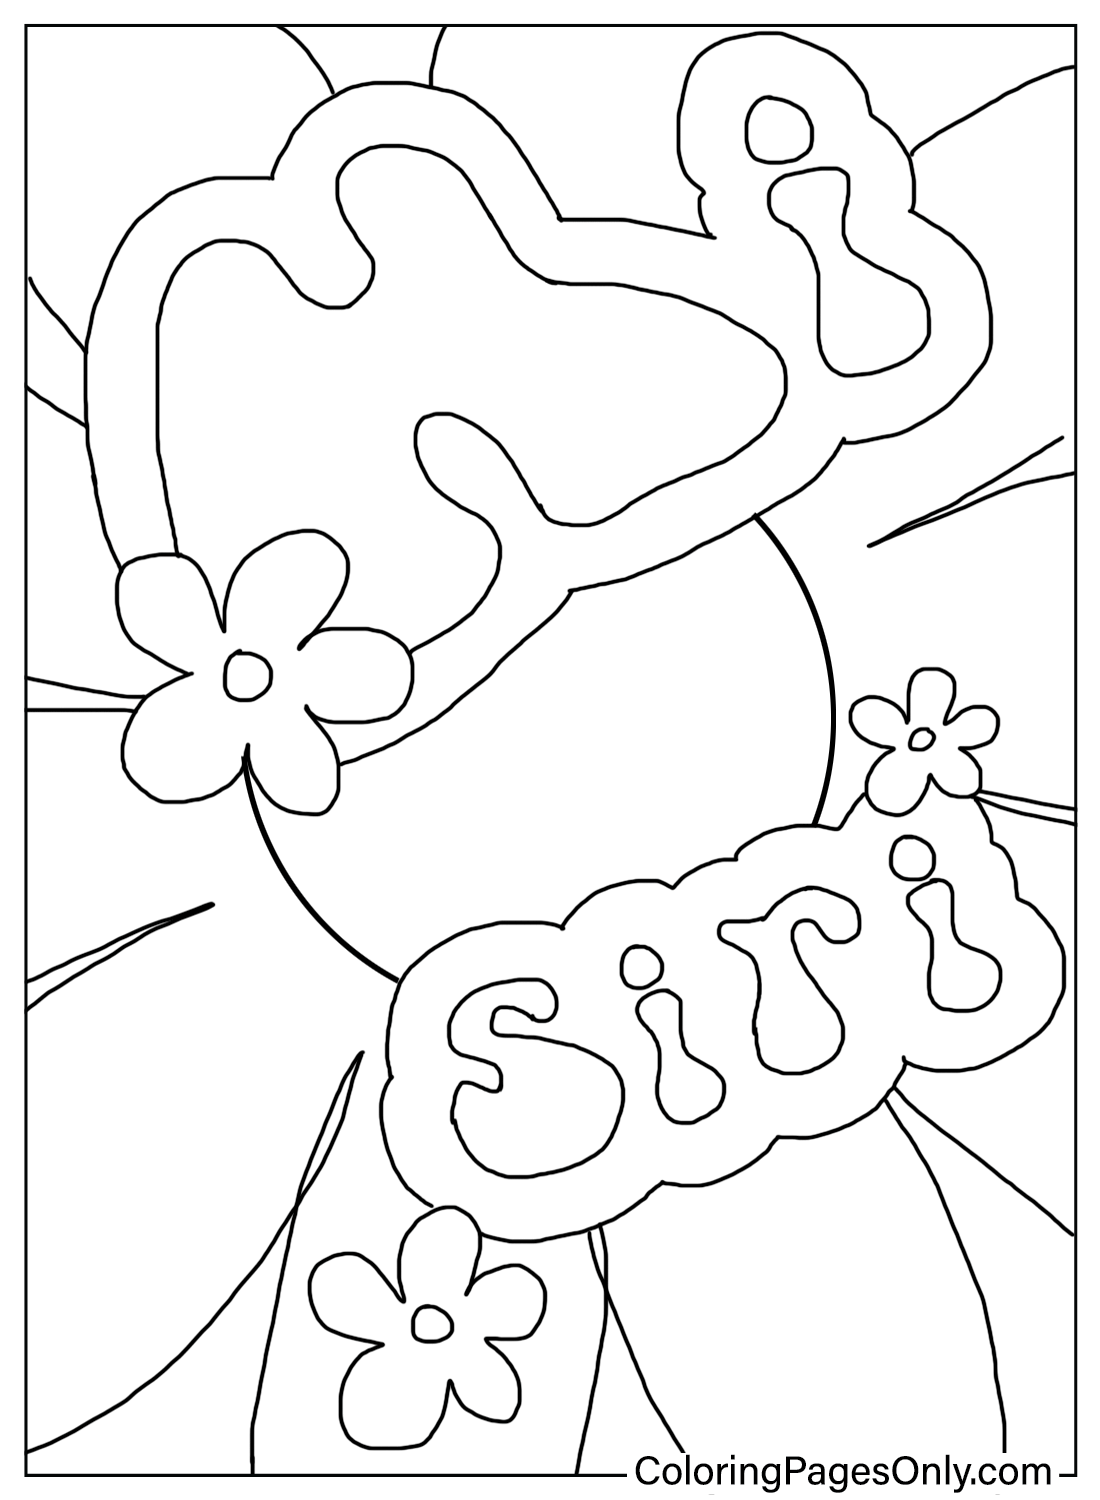 Coloring Page Hippie Hi Siri from Hippie